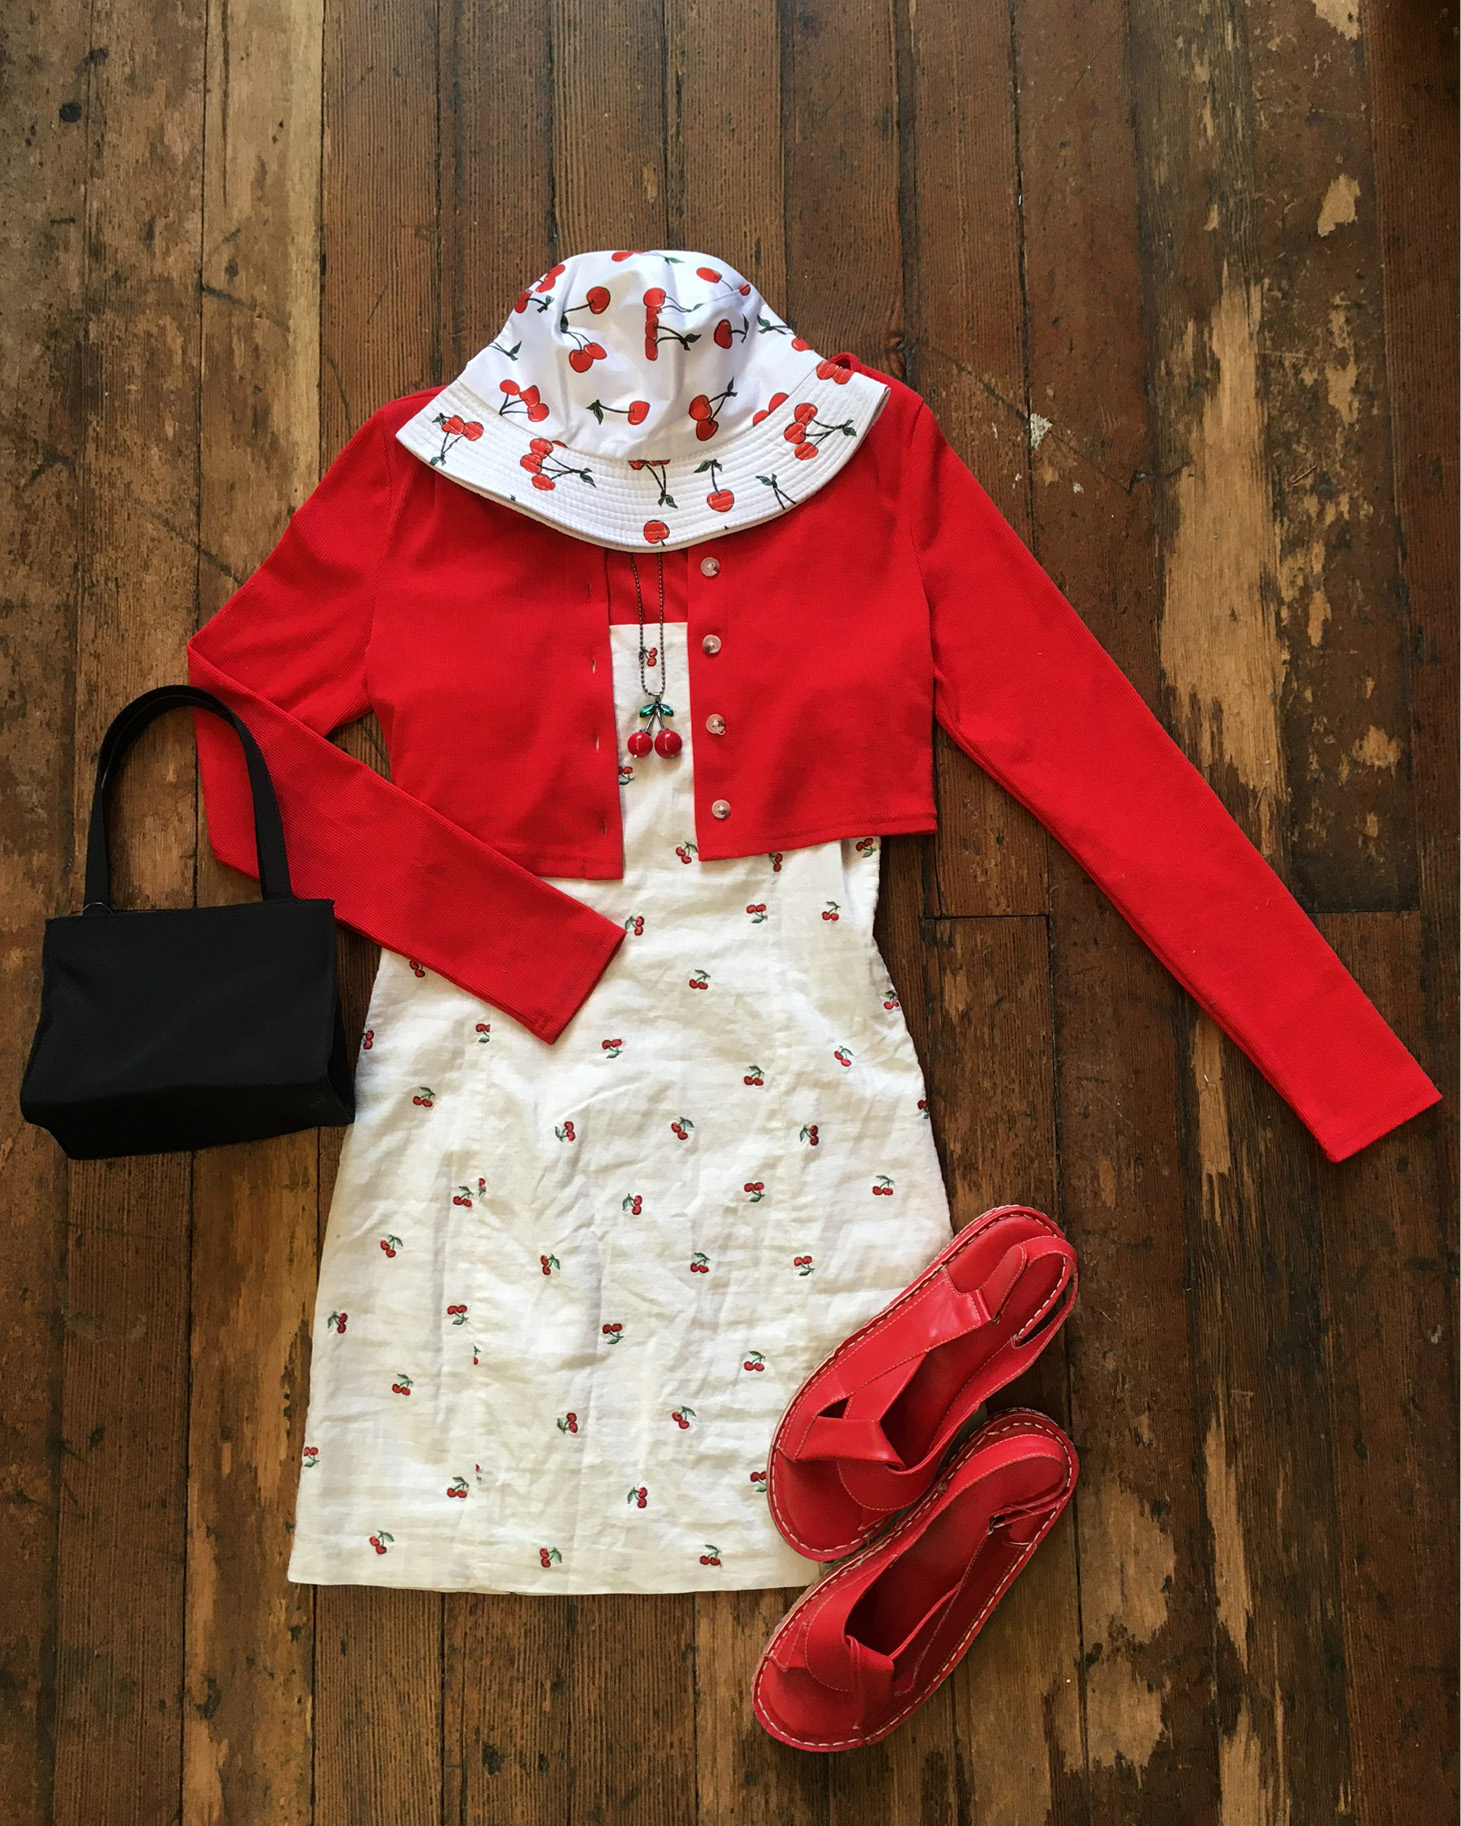 cherry-printed dress, cropped red cardigan, red sandals, black handbag and cherry printed bucket hat